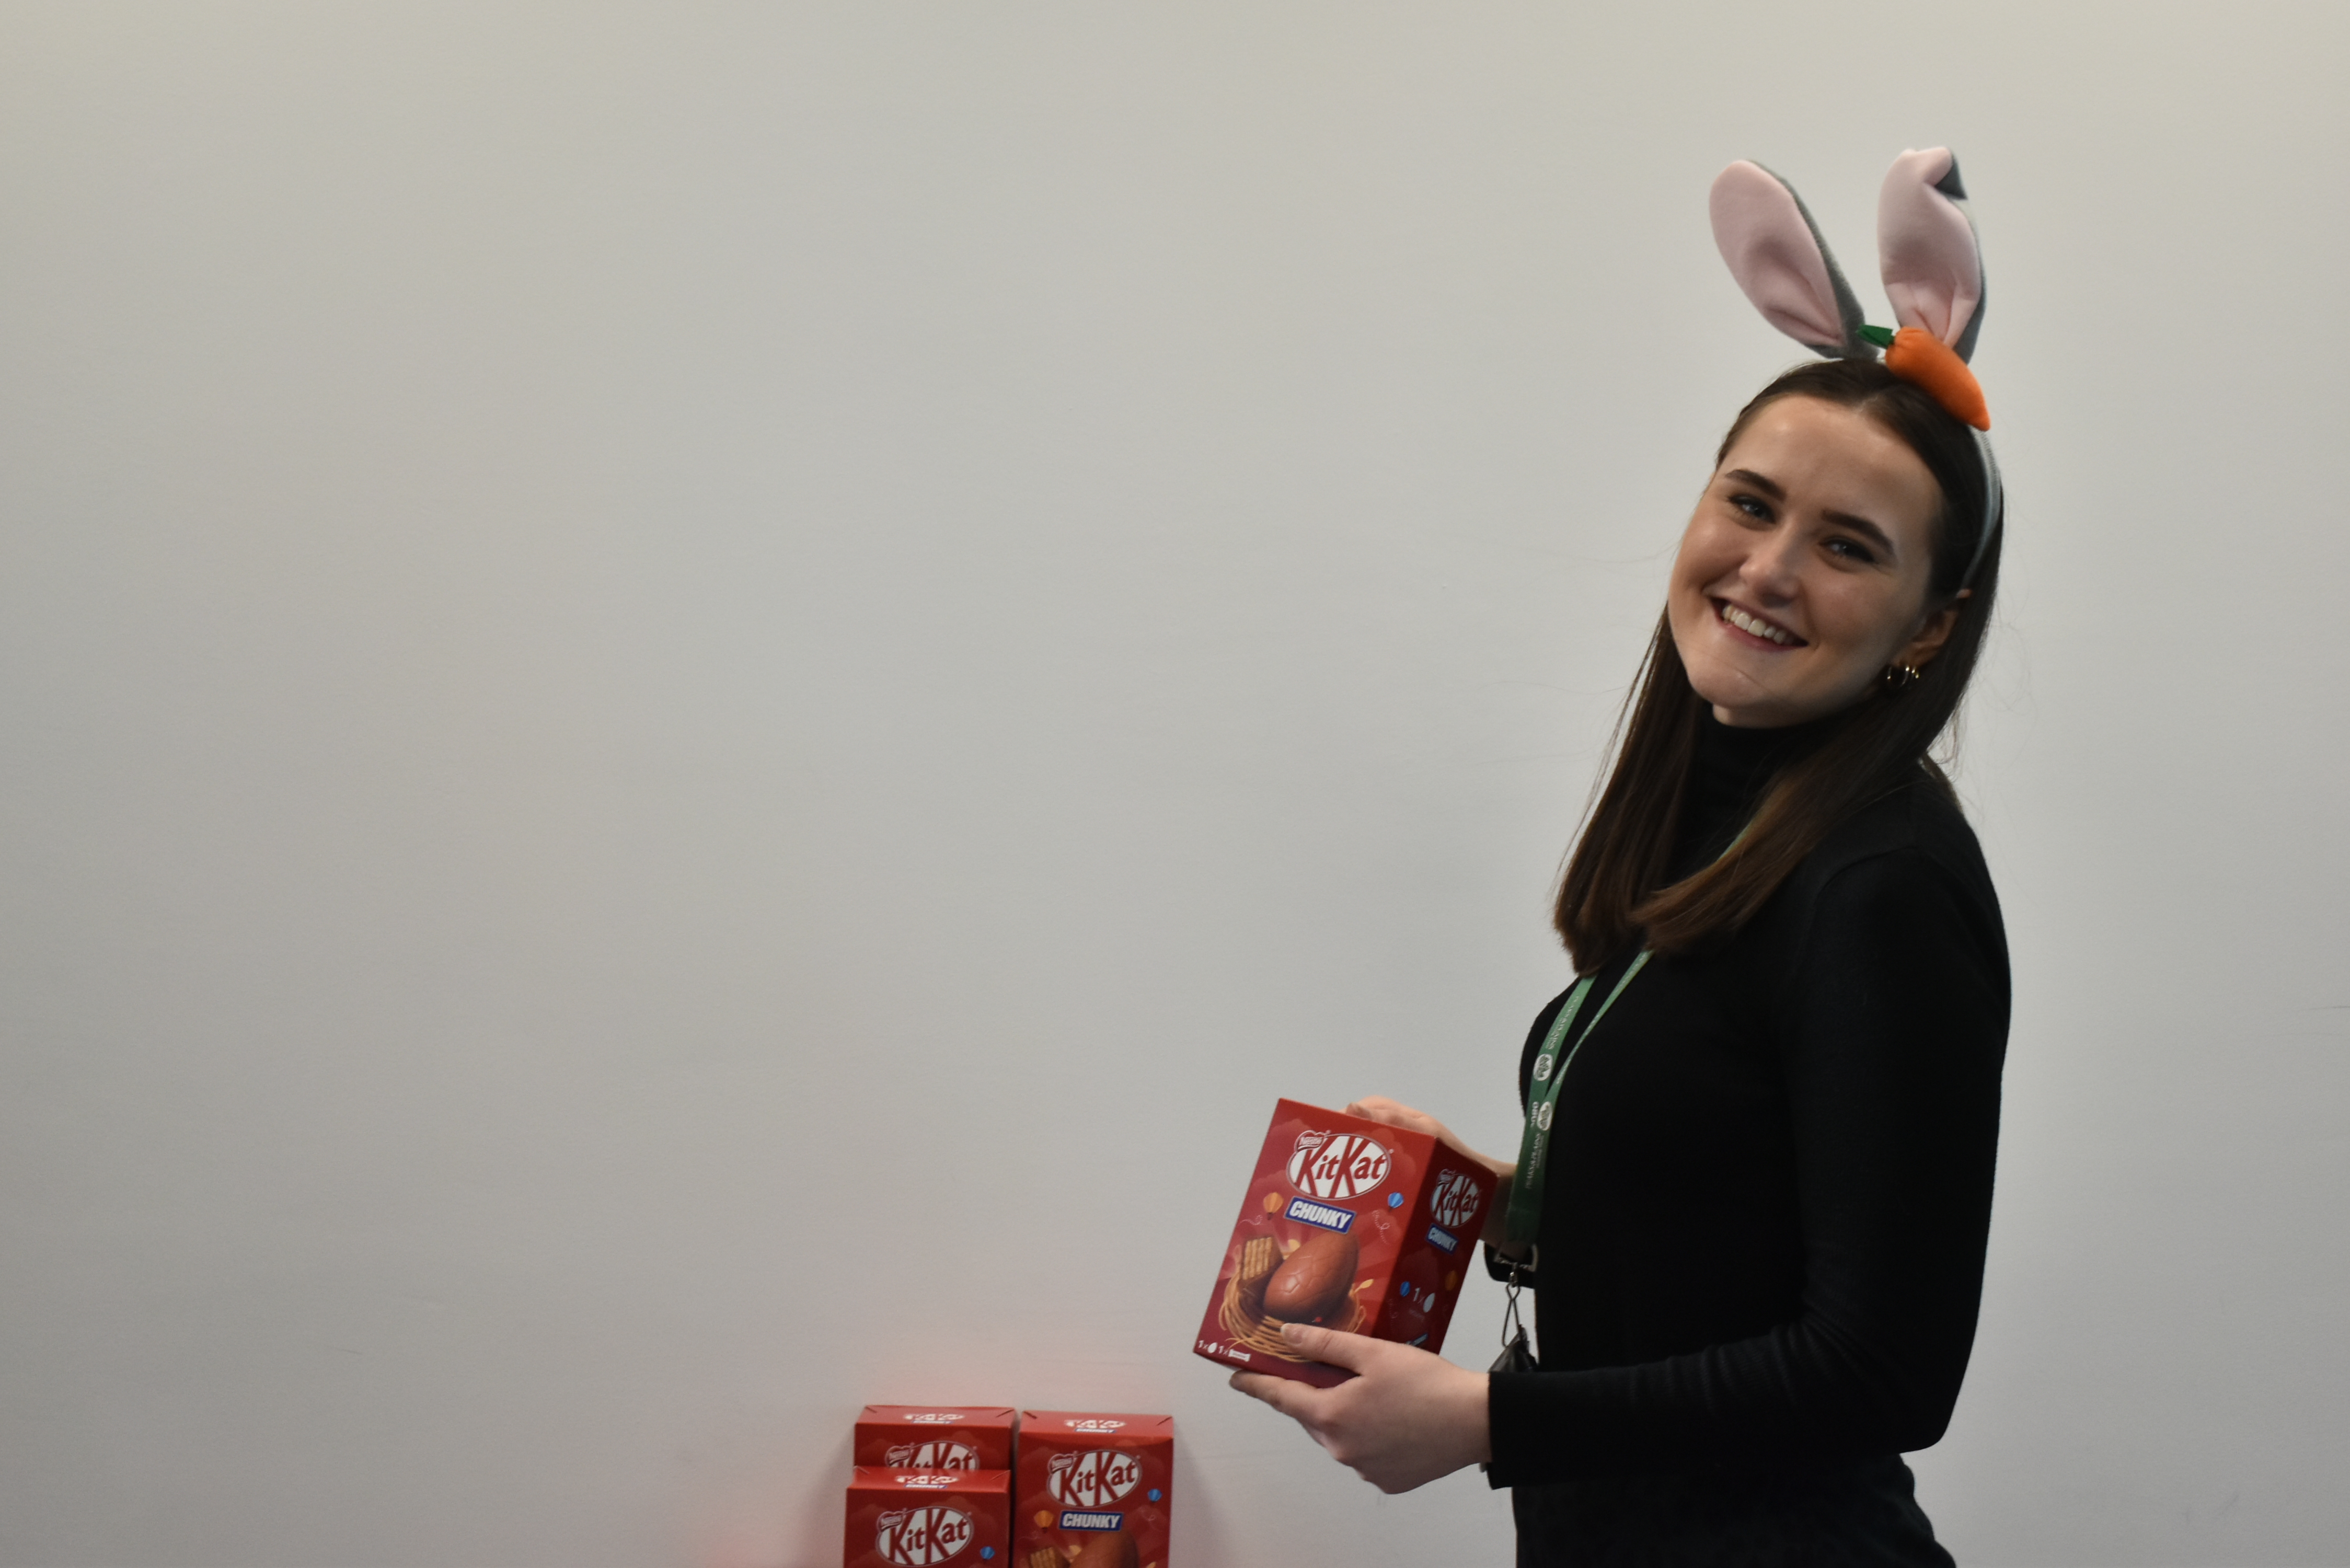 Rachel, our Customer Voice Manager, posing with the Easter eggs that were donated for our Easter event. This is a yearly event that Rachel organises for our customers.